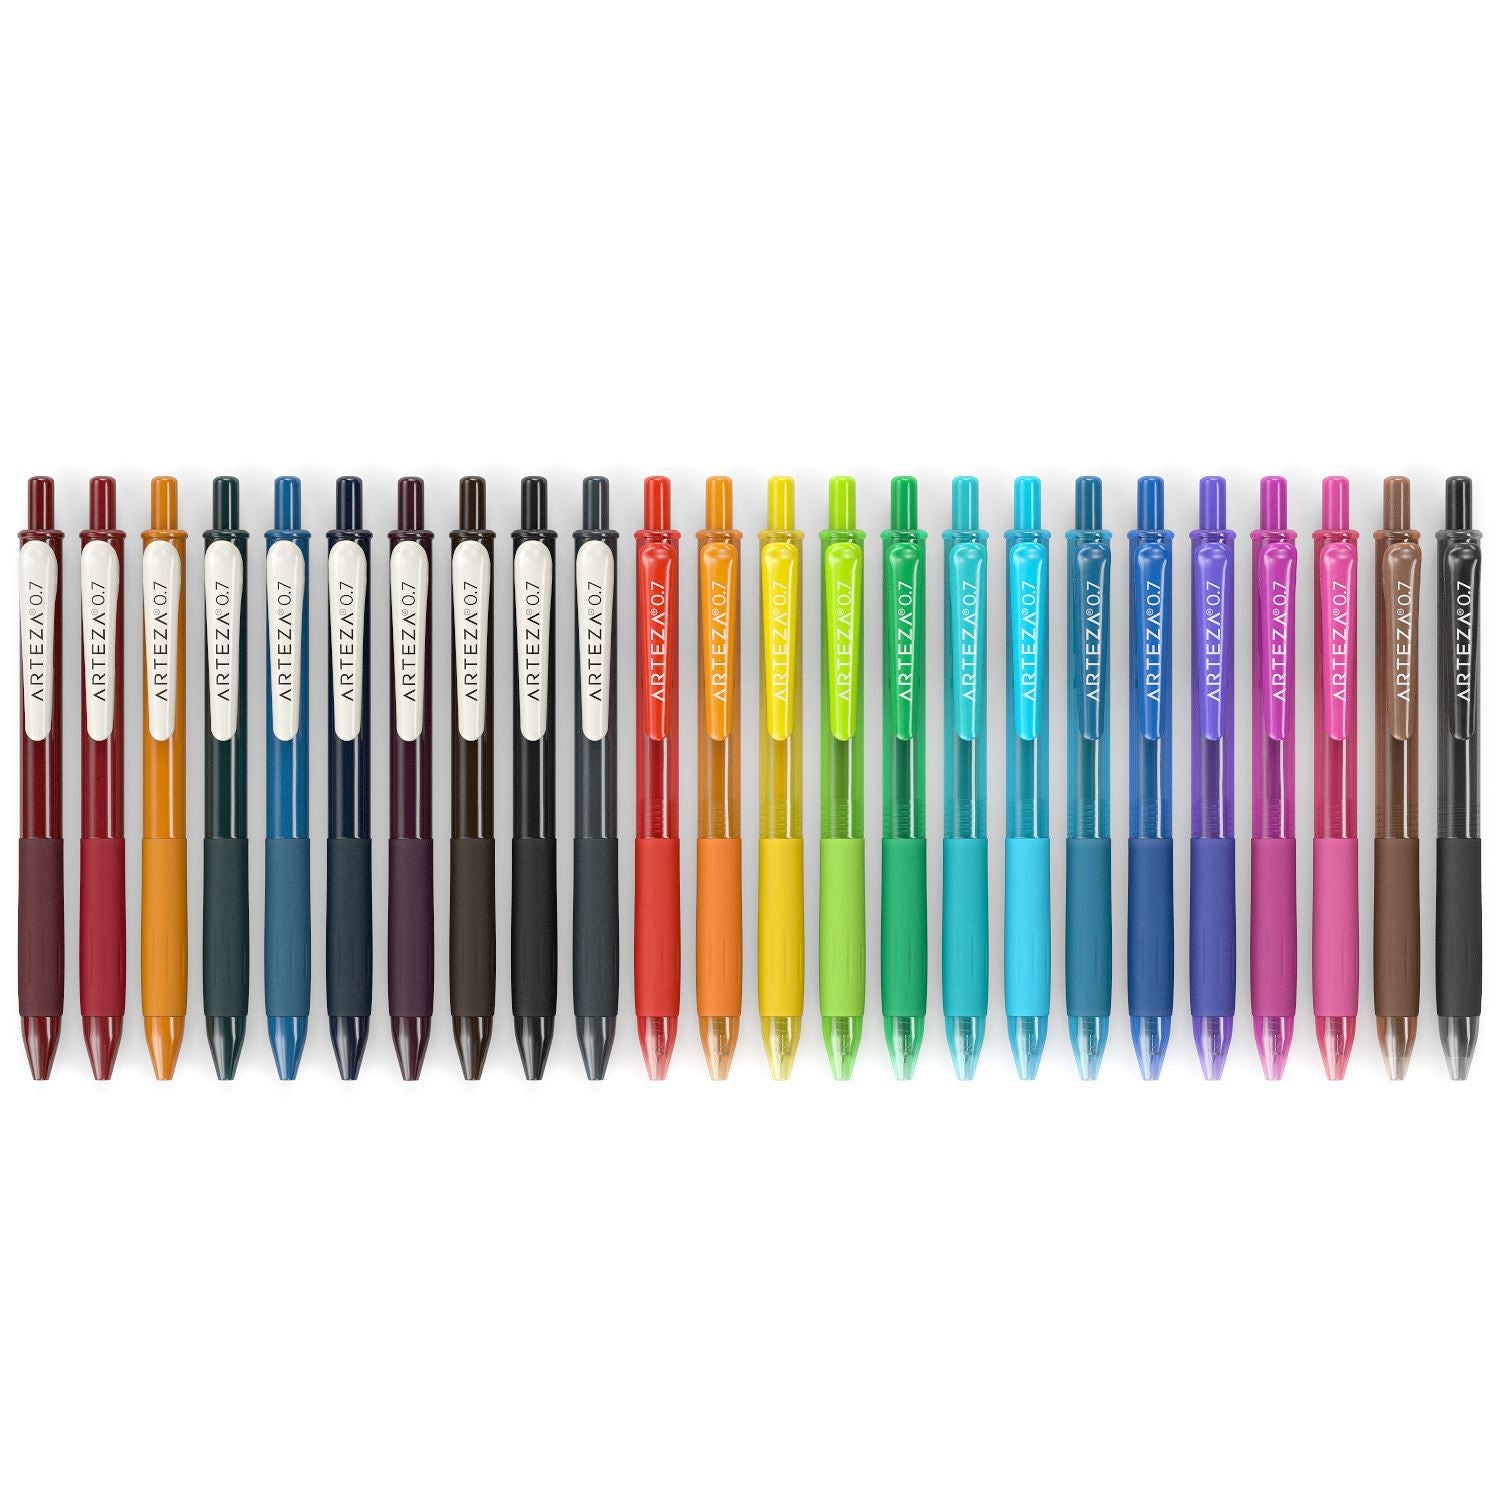 New and used Colored Pens for sale